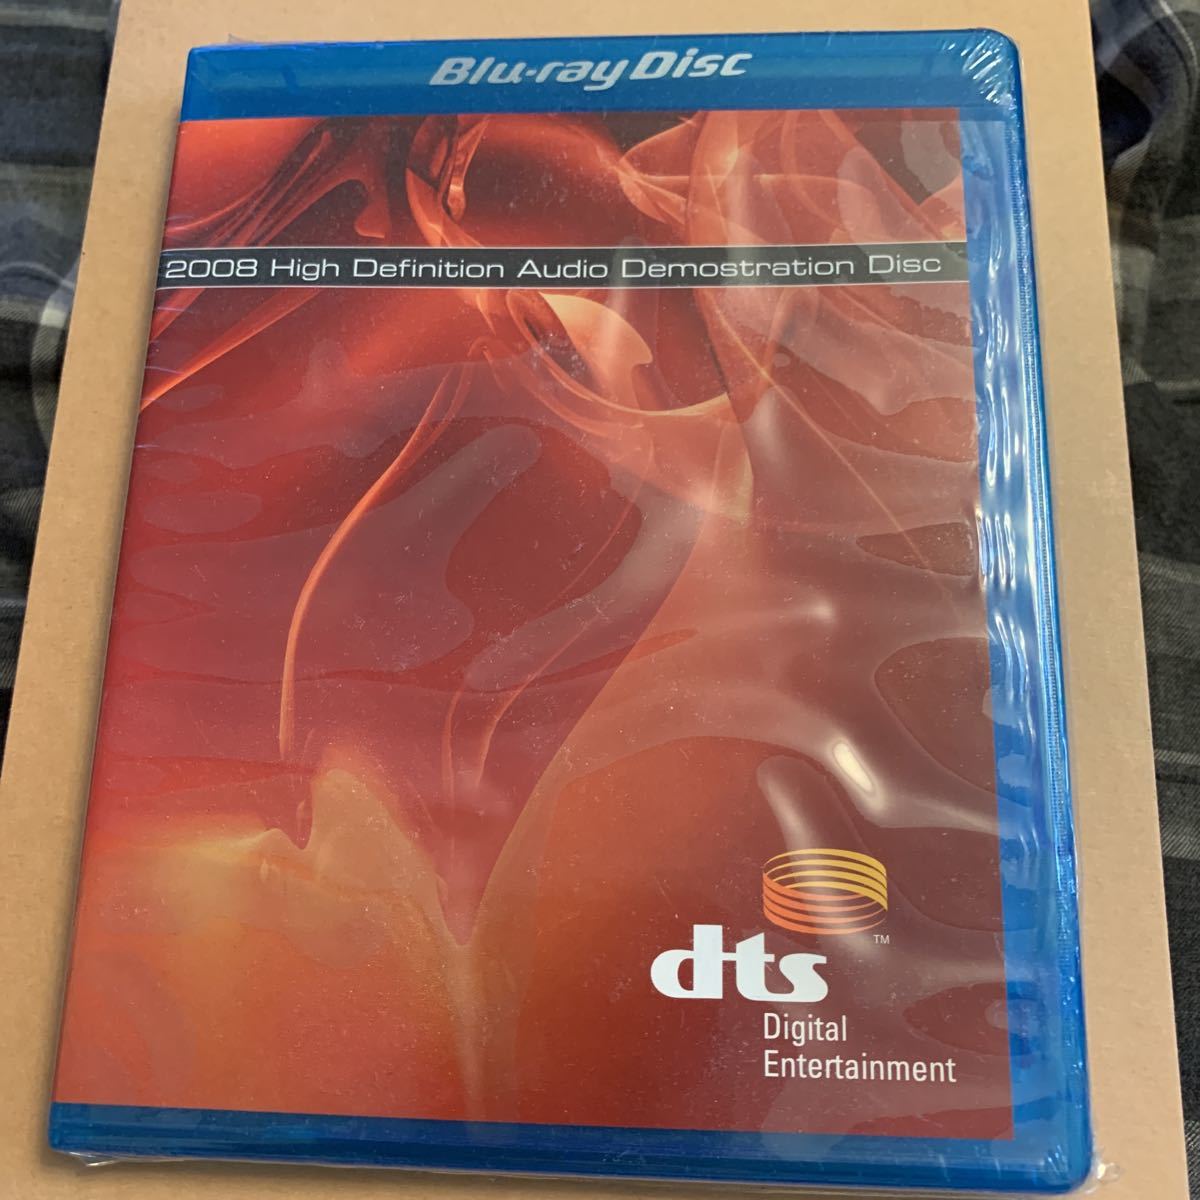  demo disk | unused | unopened |dts|THE WHO|2008